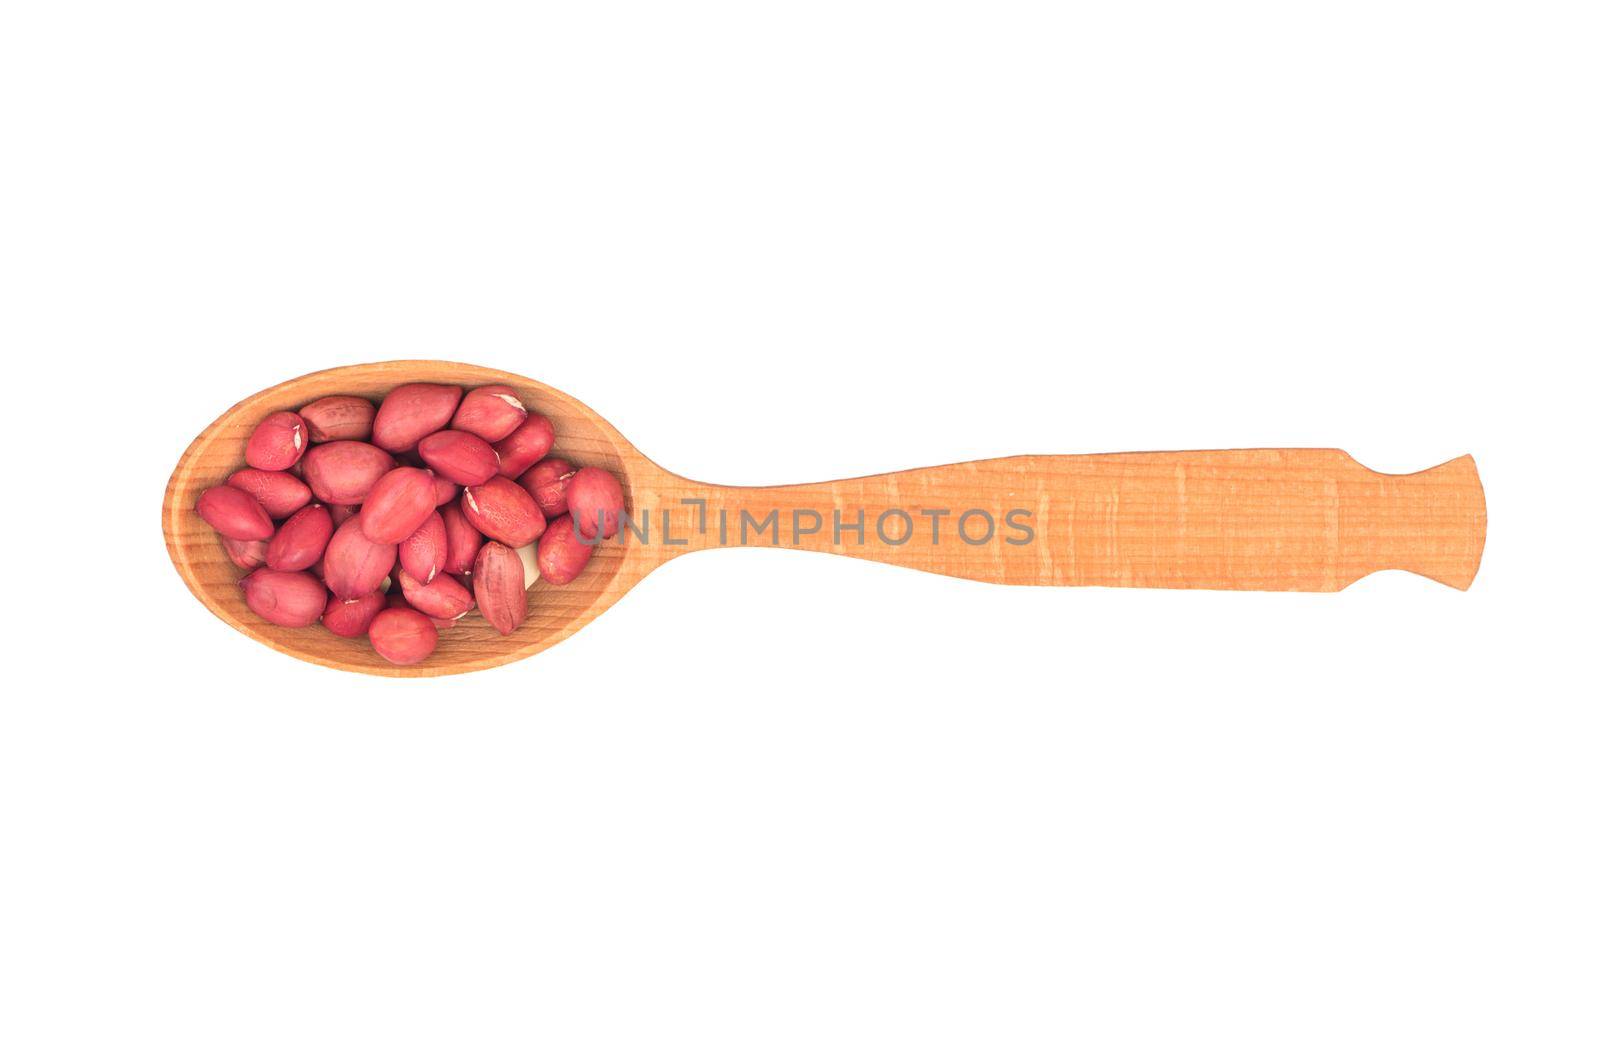 Kernel peanut in wooden spoon isolated on white background, top view